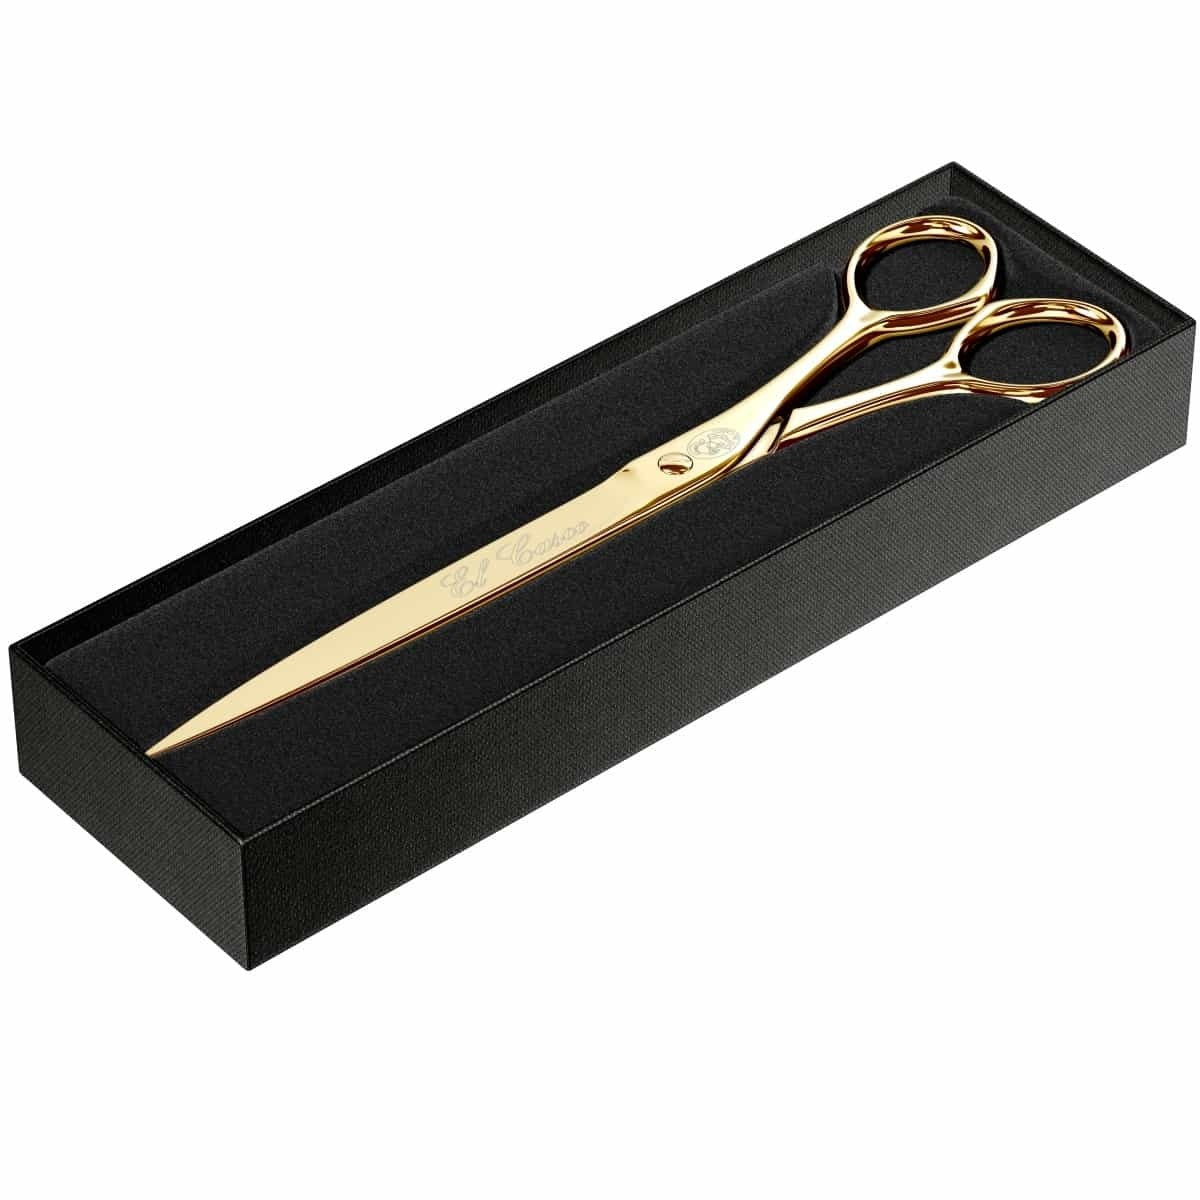 Gold Gold-Plated Scissors by El Casco